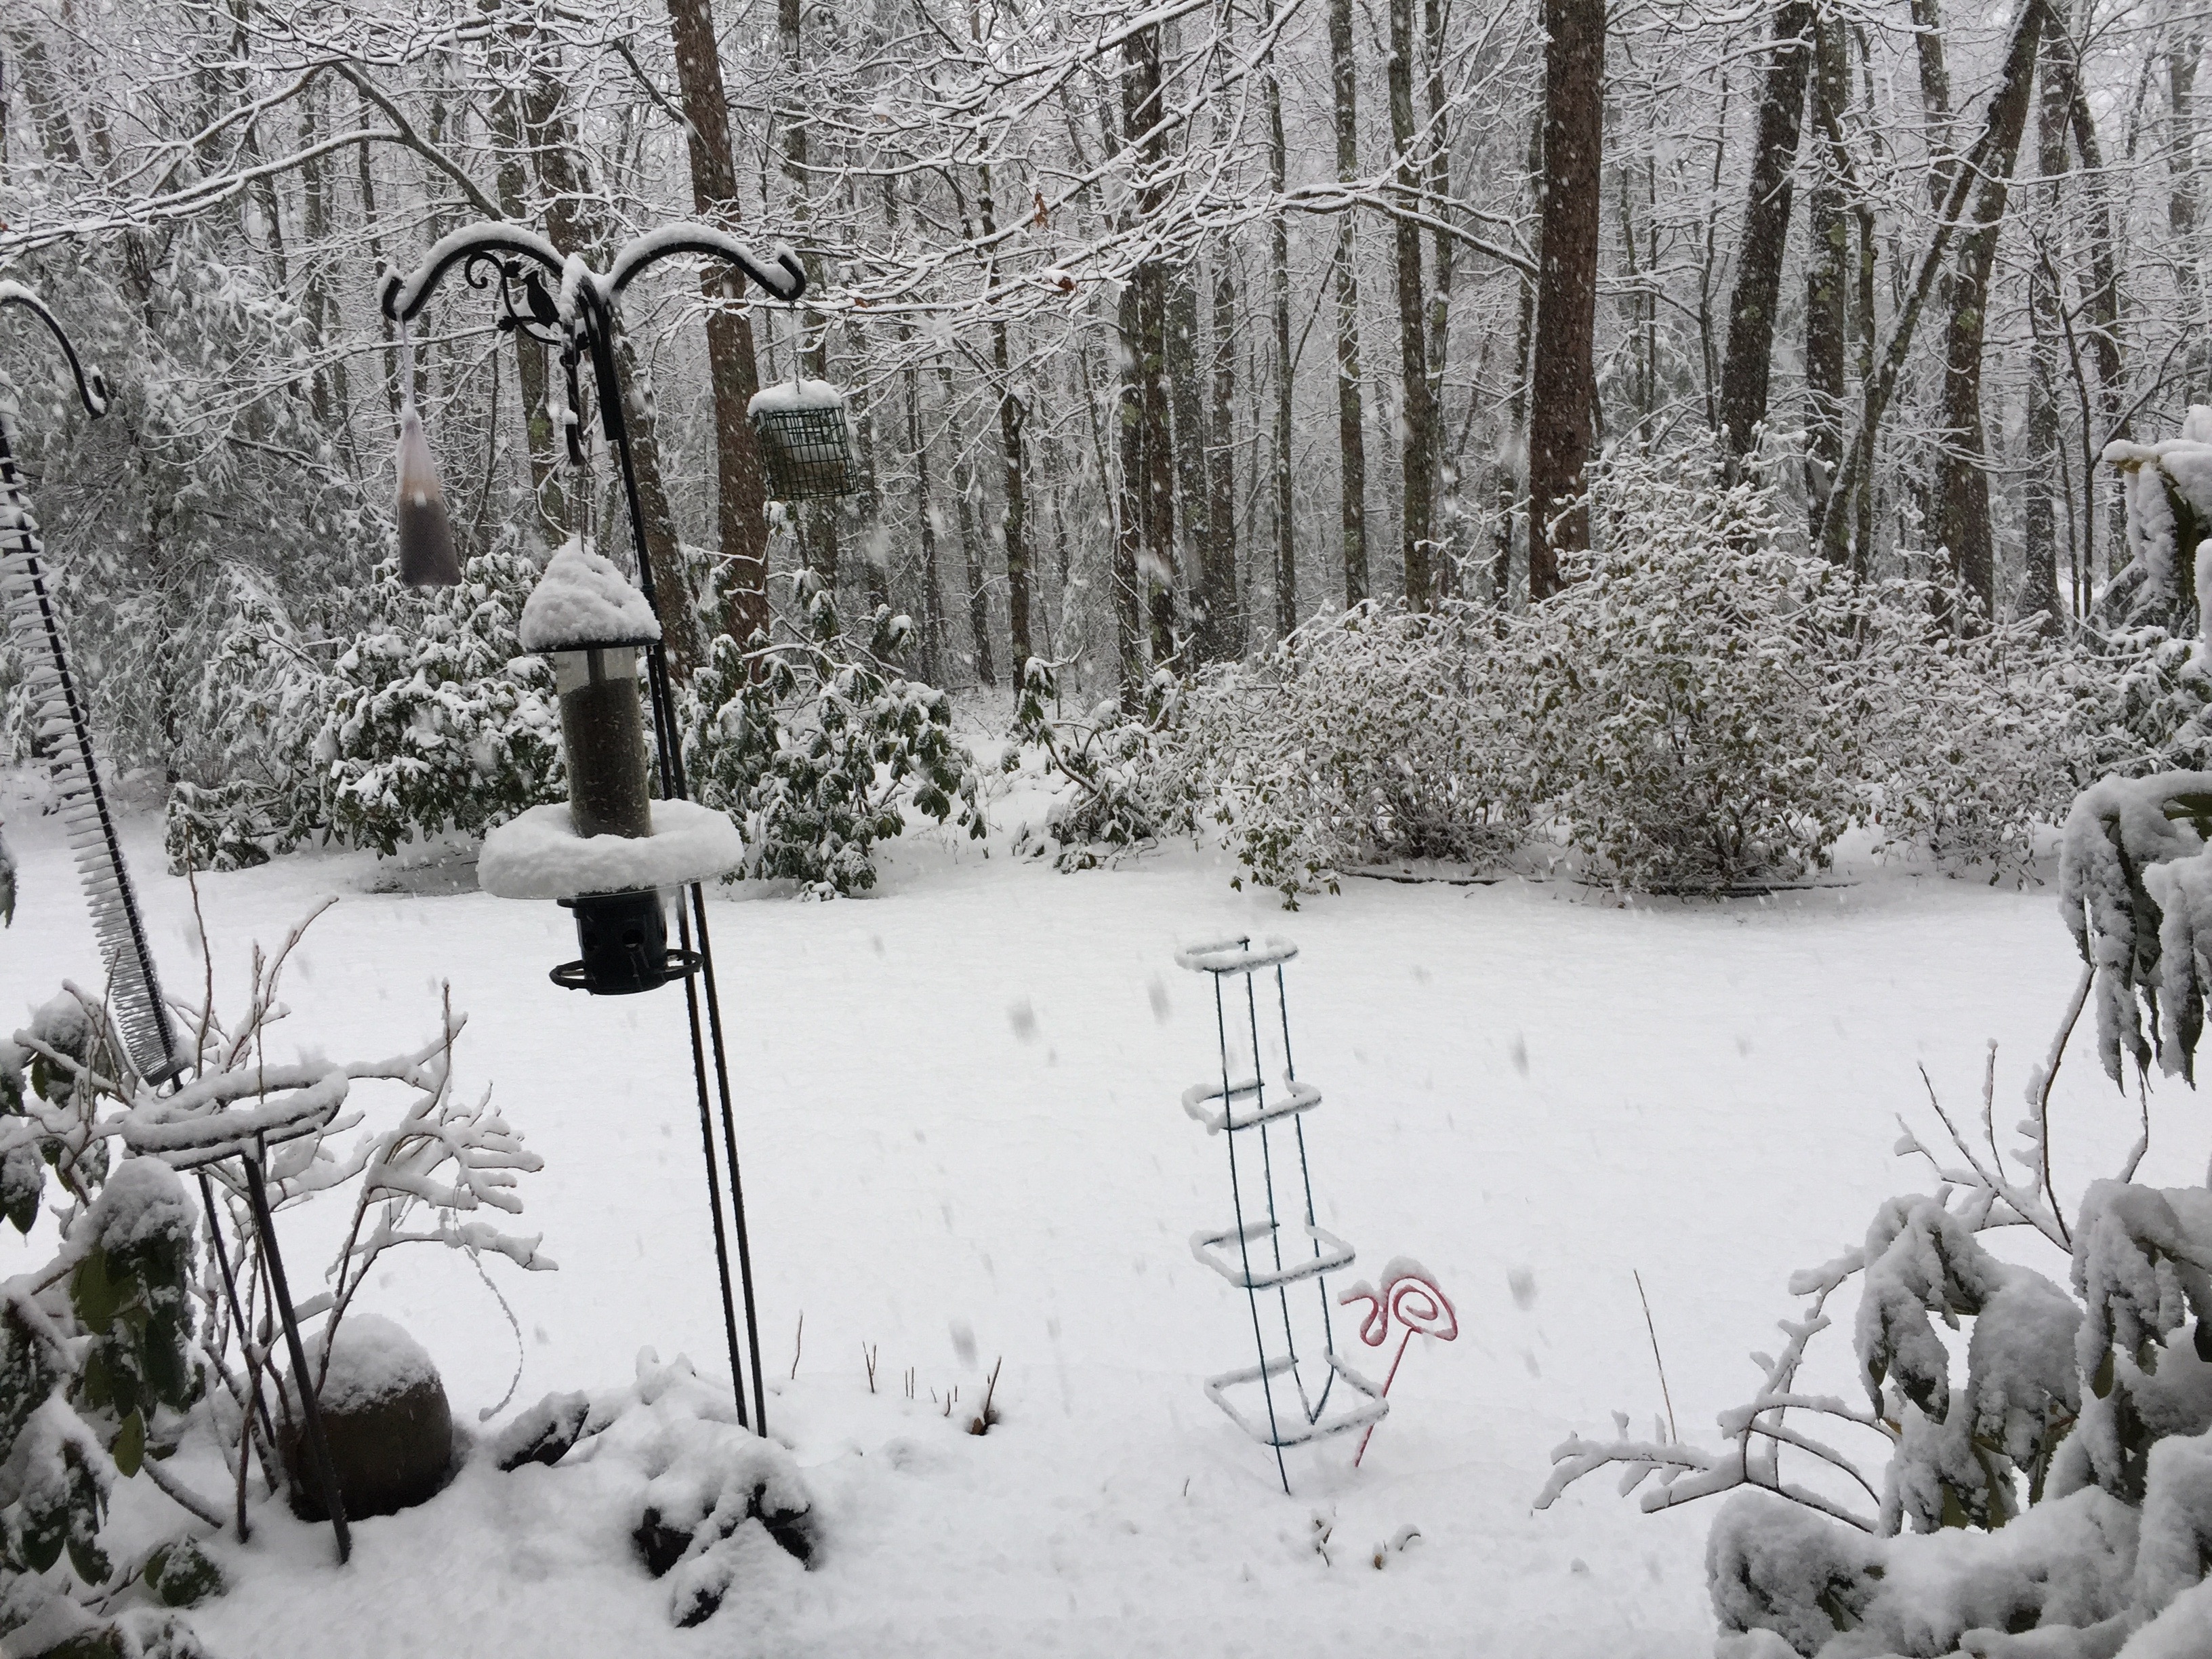 A snow-covered patio with brrd feeders showing about three inches of snow on the patio, feeders, and surrounding shrubs, as well as oak trees with bare limbs covered with snow